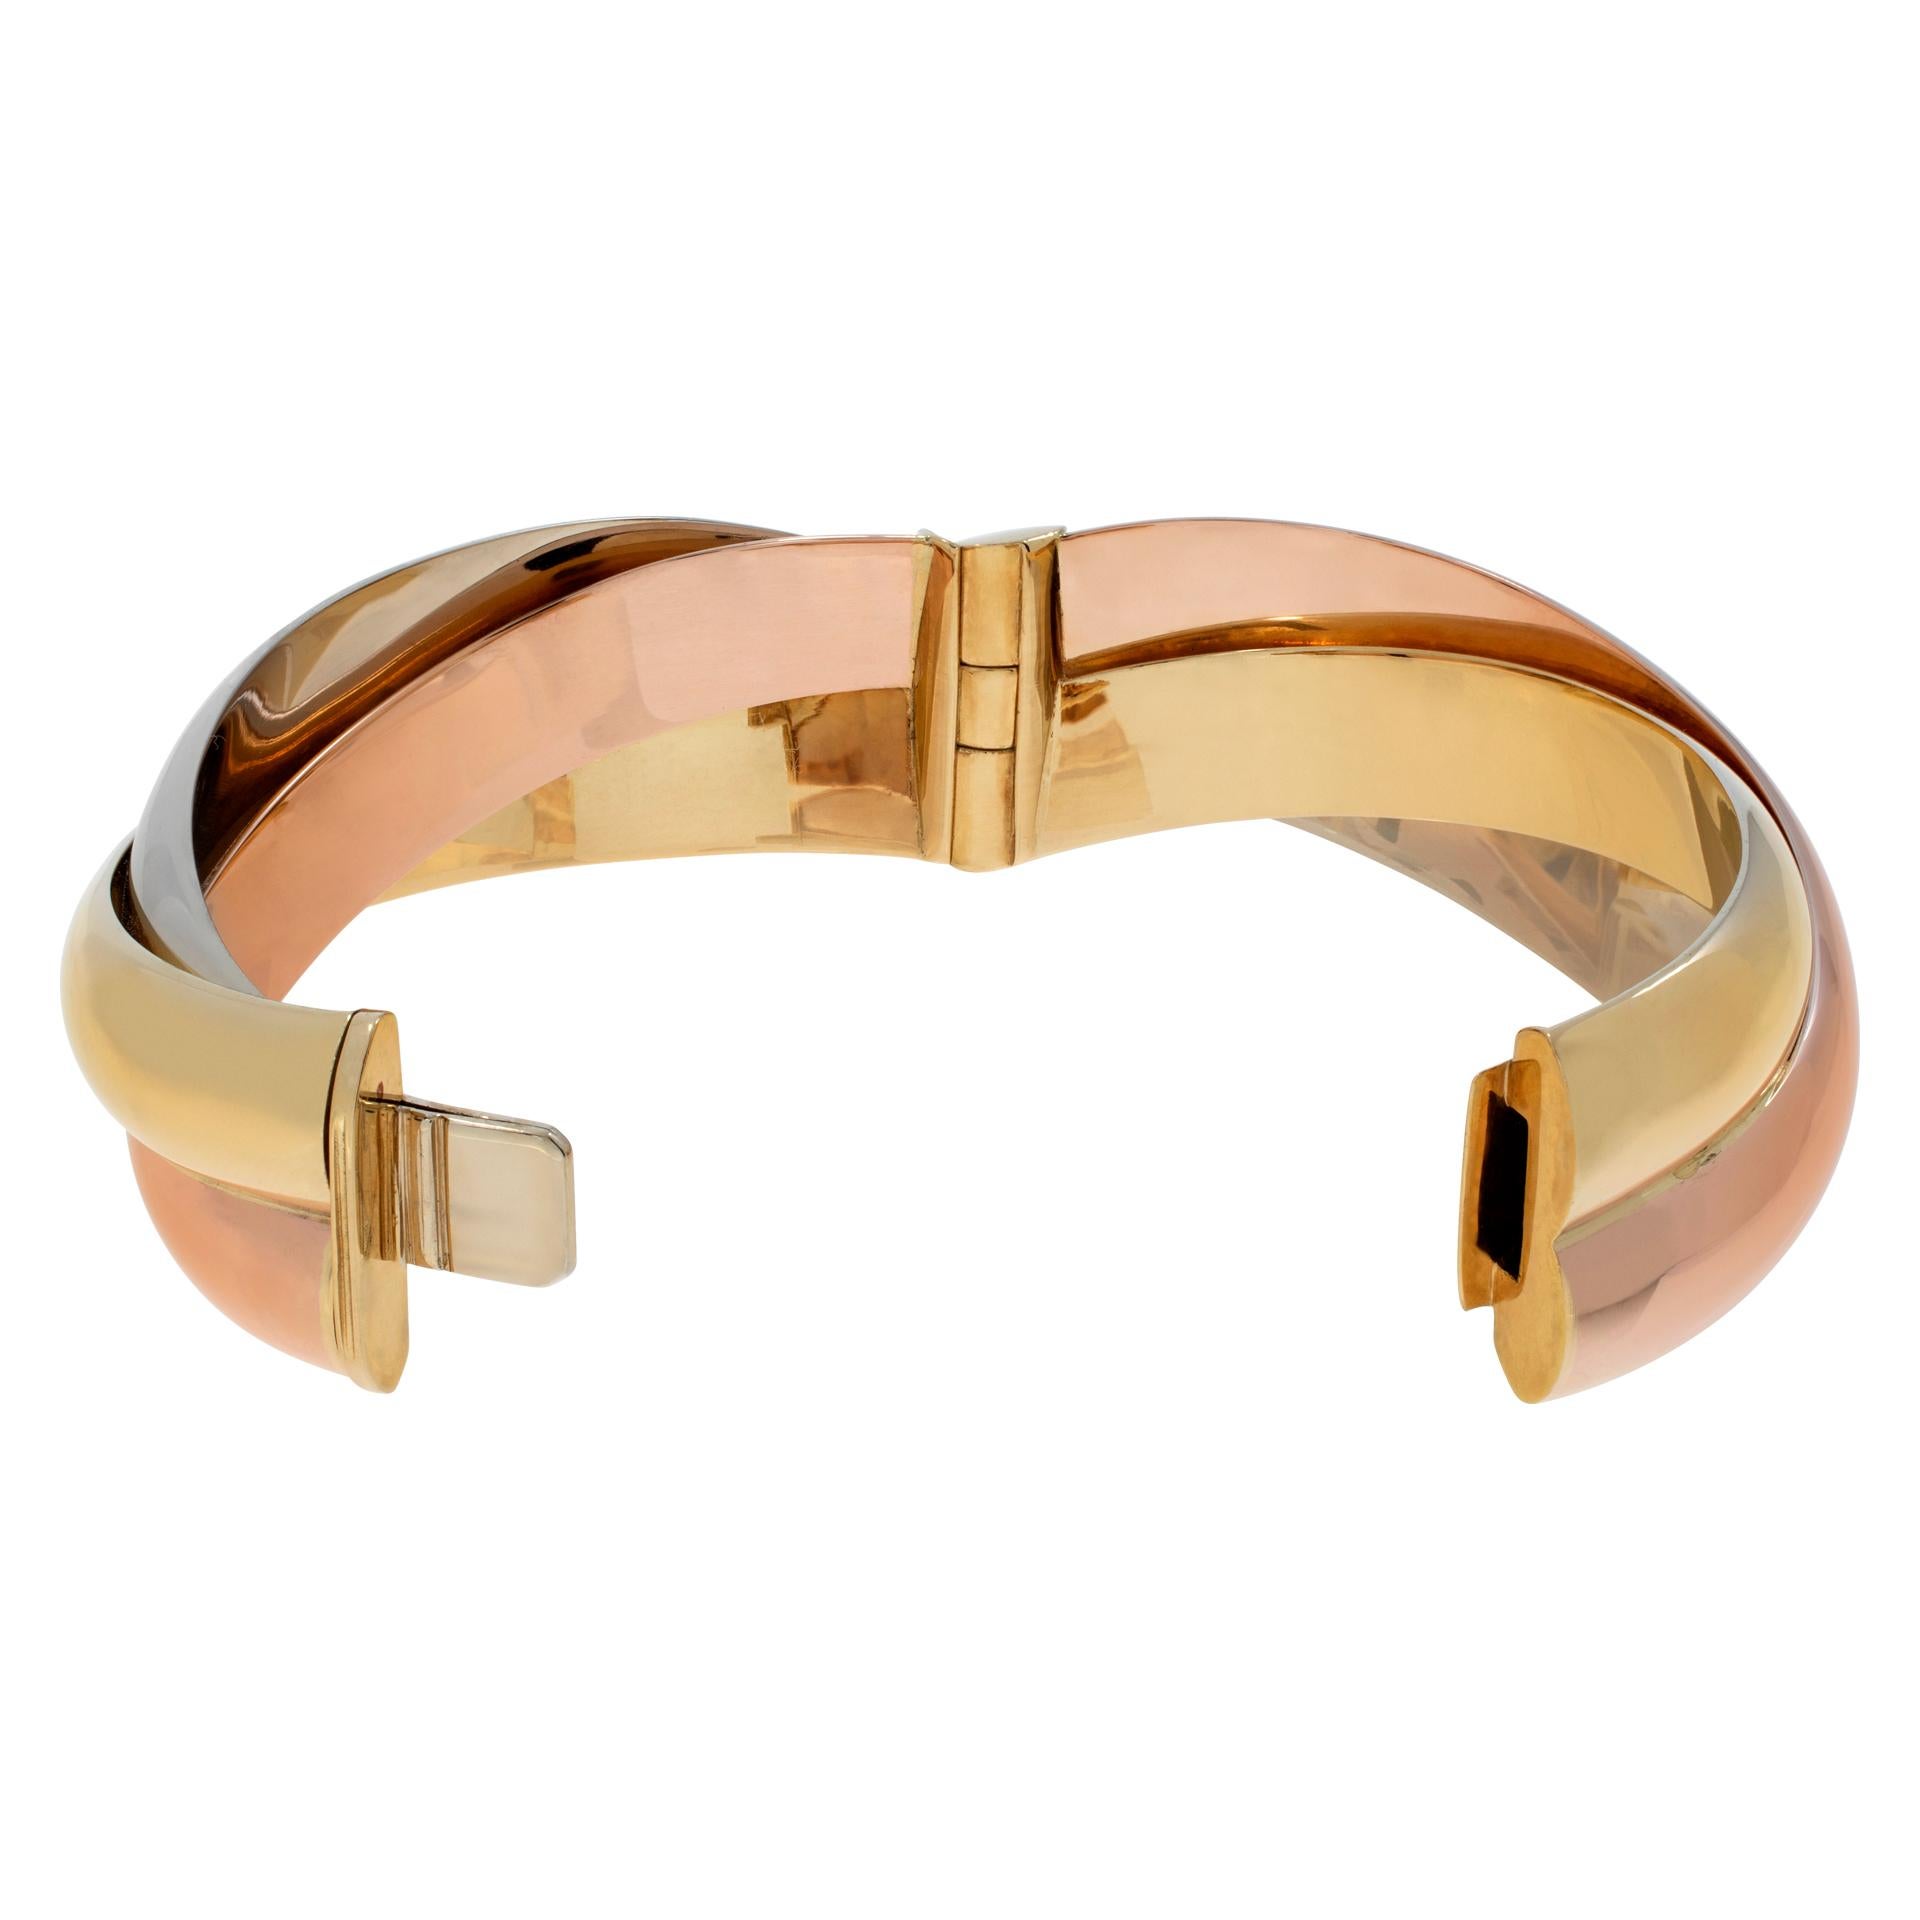 White, yellow and rose gold bangle bracelet In Excellent Condition For Sale In Surfside, FL